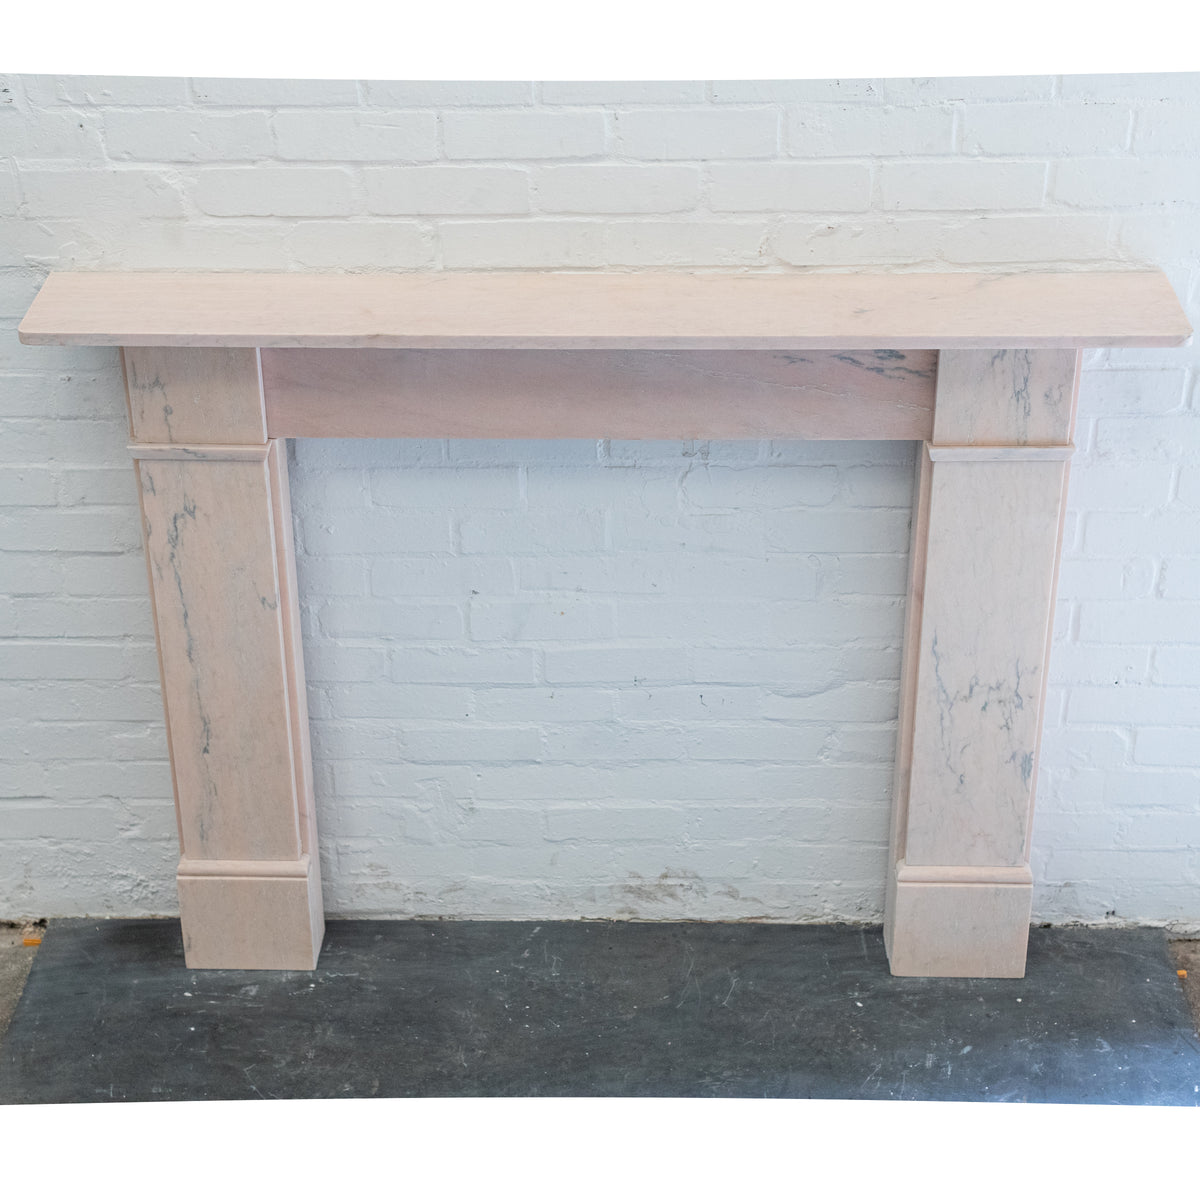 Victorian Style Chimneypiece Made from Reclaimed Pink Marble | The Architectural Forum